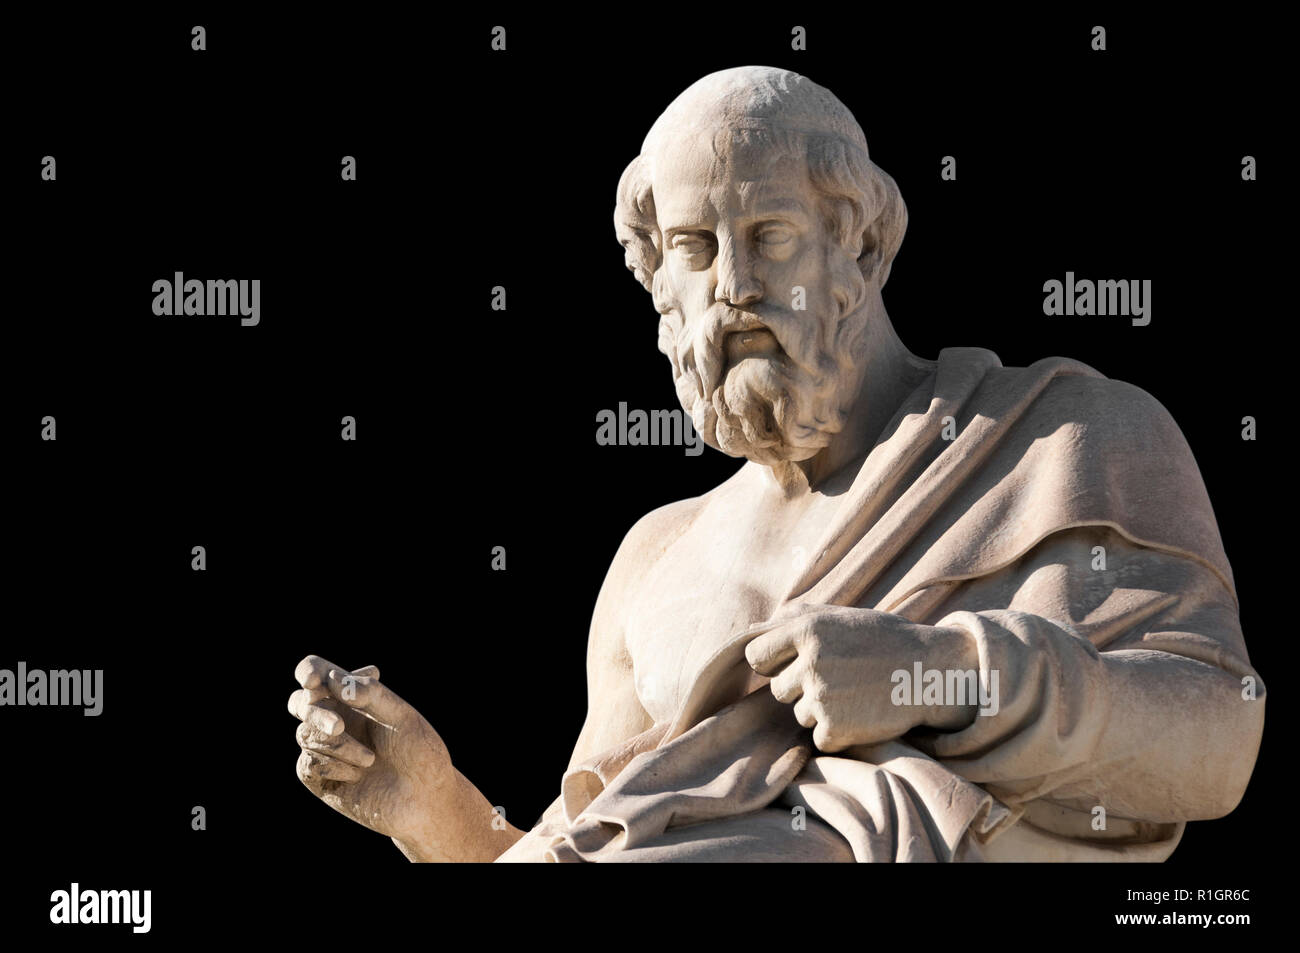 classic statue of Plato from side close up Stock Photo